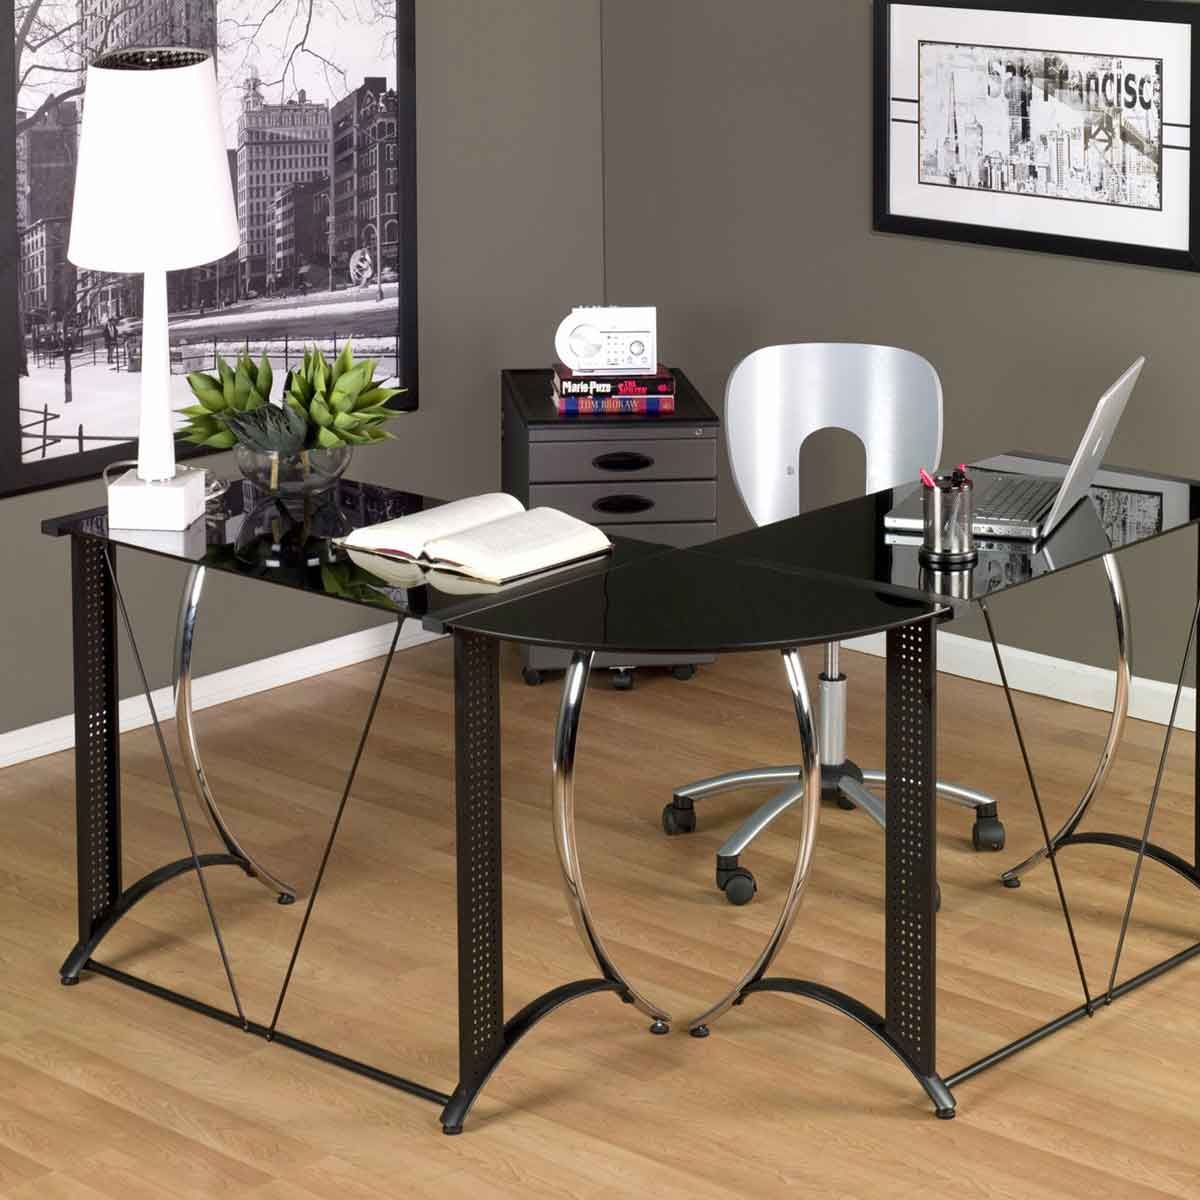 9 Black Office Desk Designs & How To Choose The Best One | Pouted Intended For White And Black Office Desks (View 1 of 15)